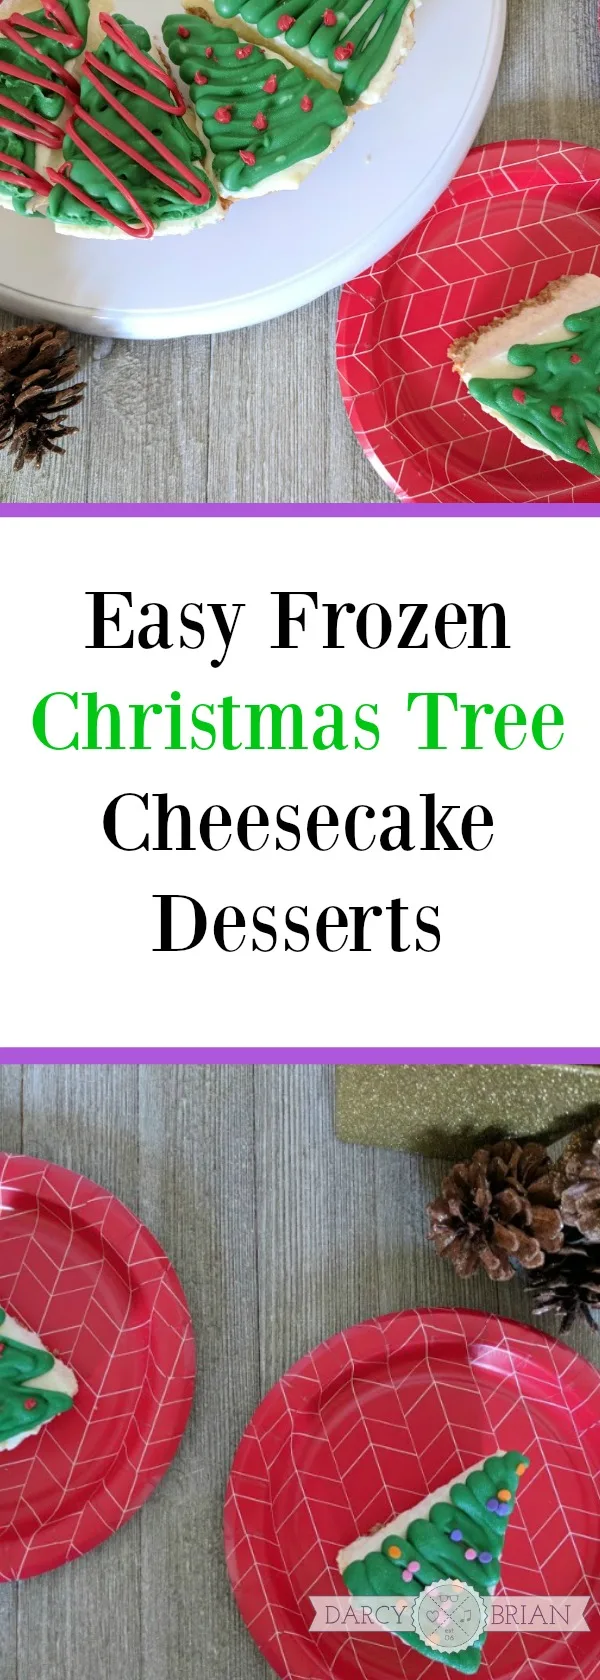 Aren't these frozen Christmas tree cheesecakes cute? Save time with this mini dessert hack. Your guests will love these fun and tasty treats! #MadeWithLove #Meijer #ad